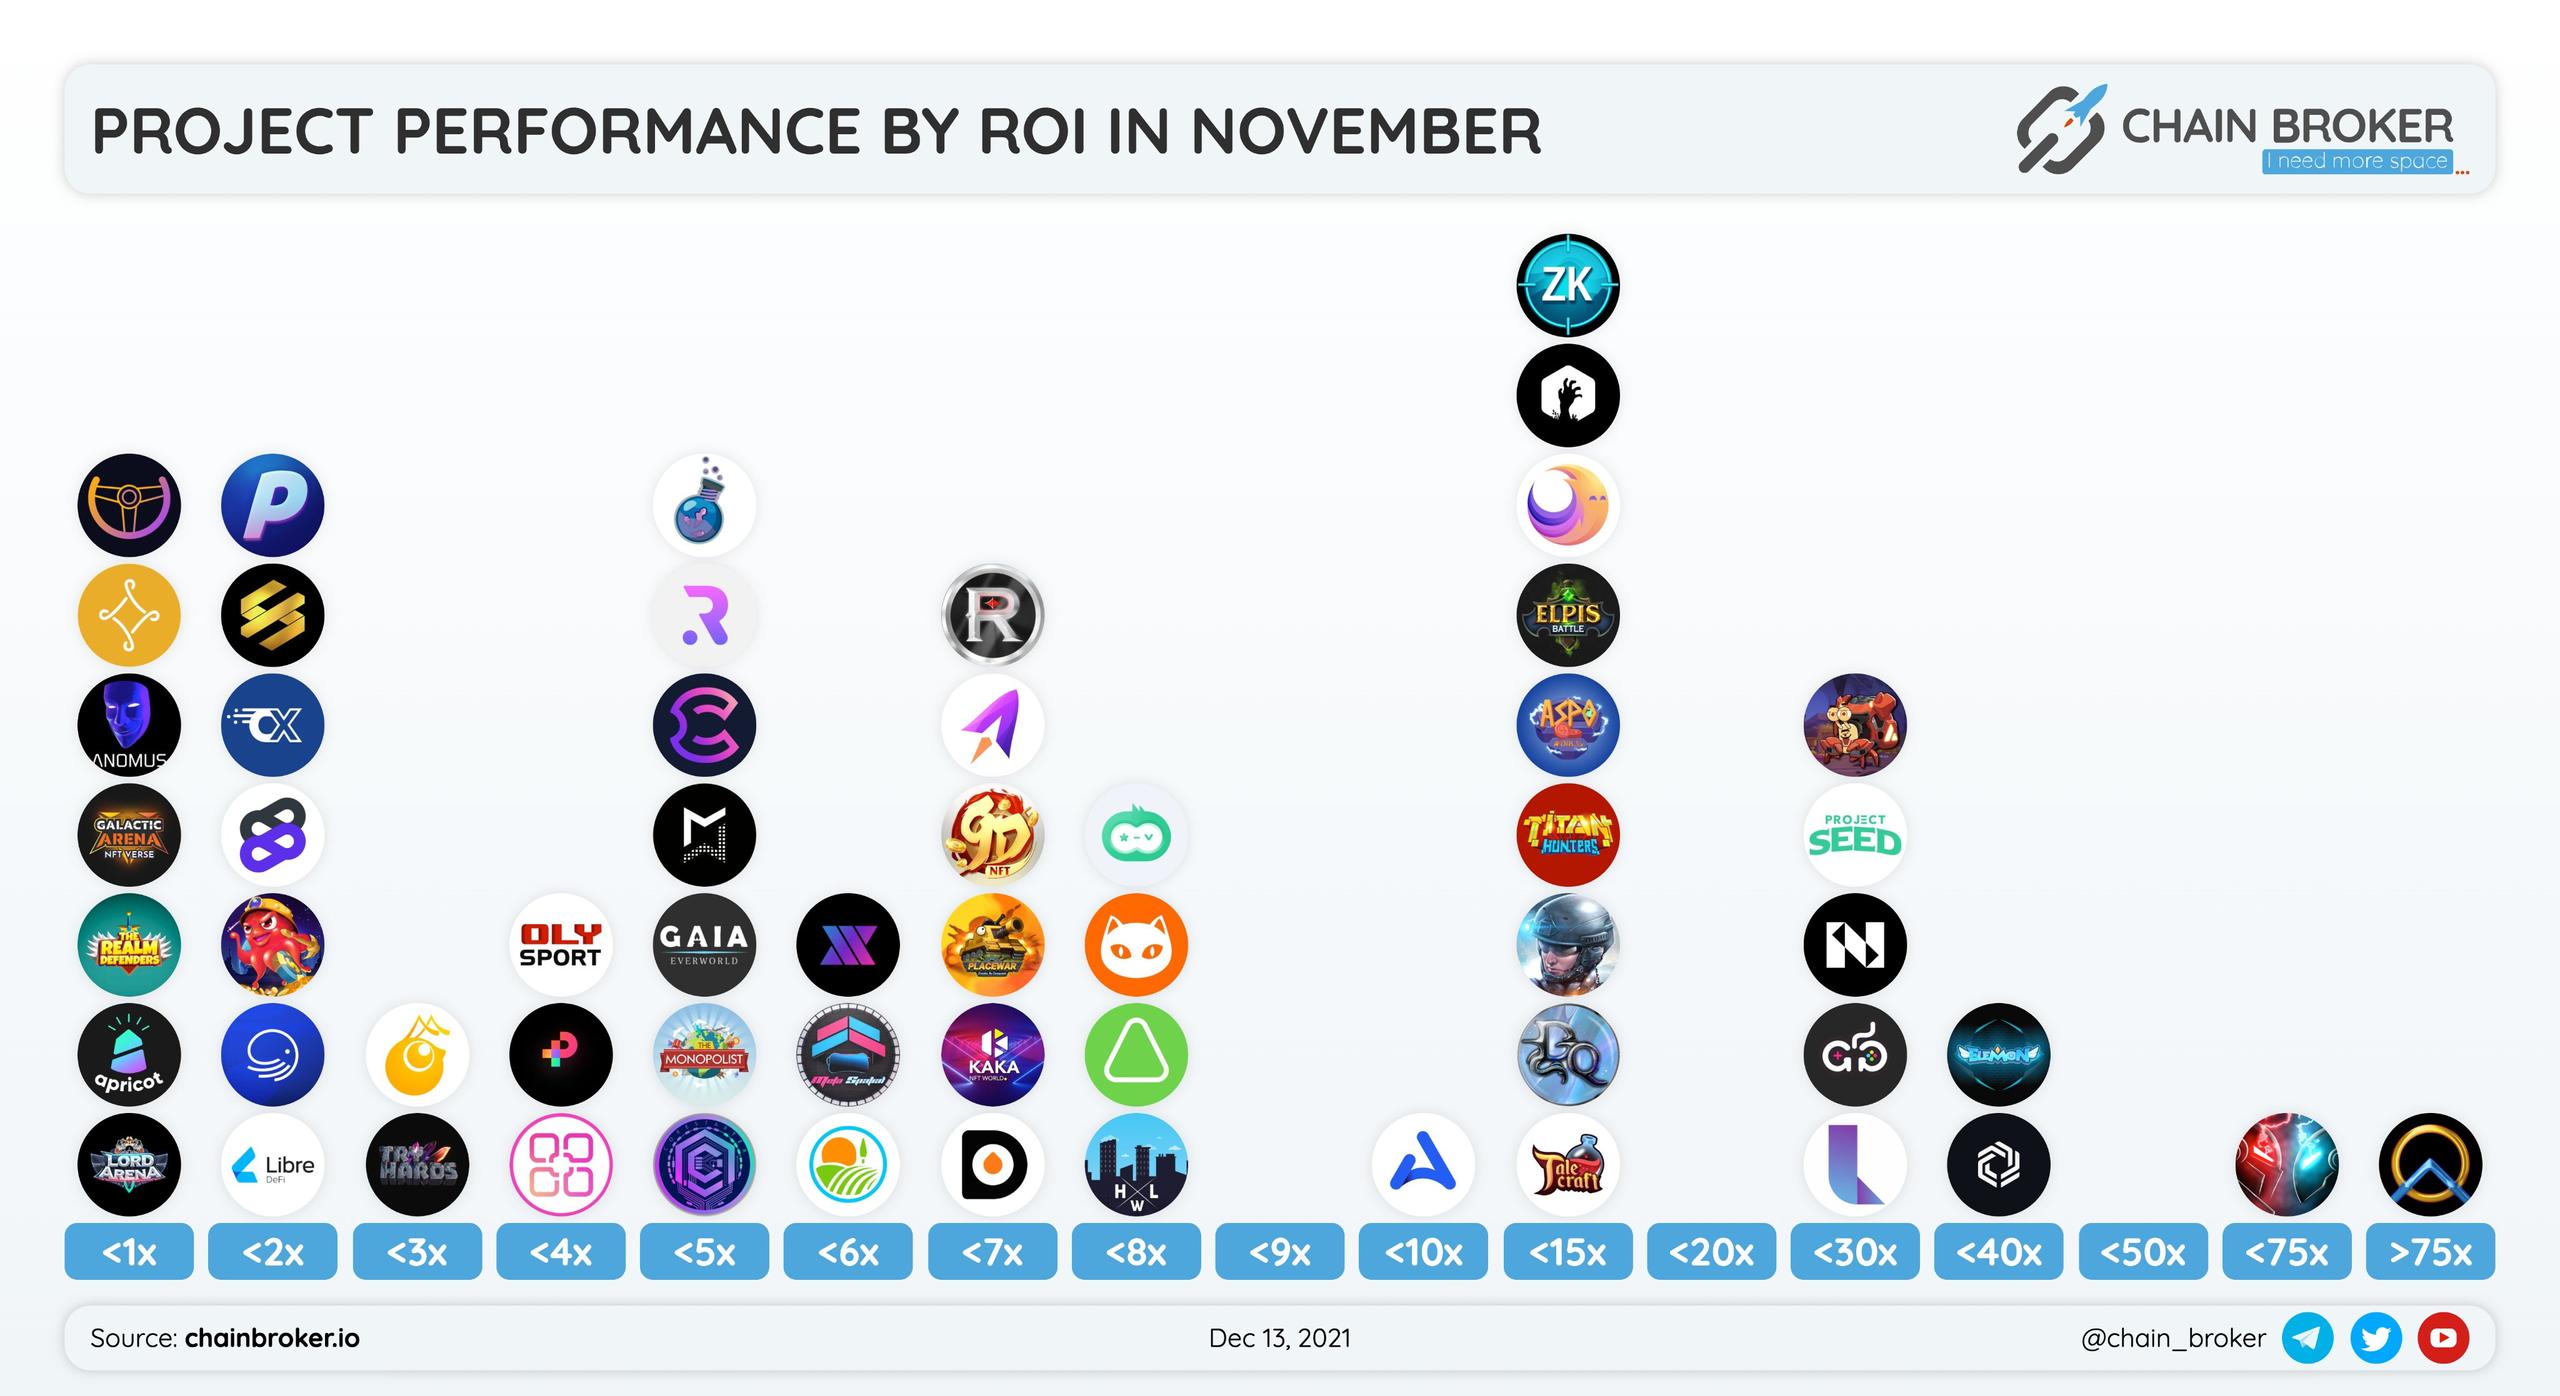 Project performance by ROI listed in November